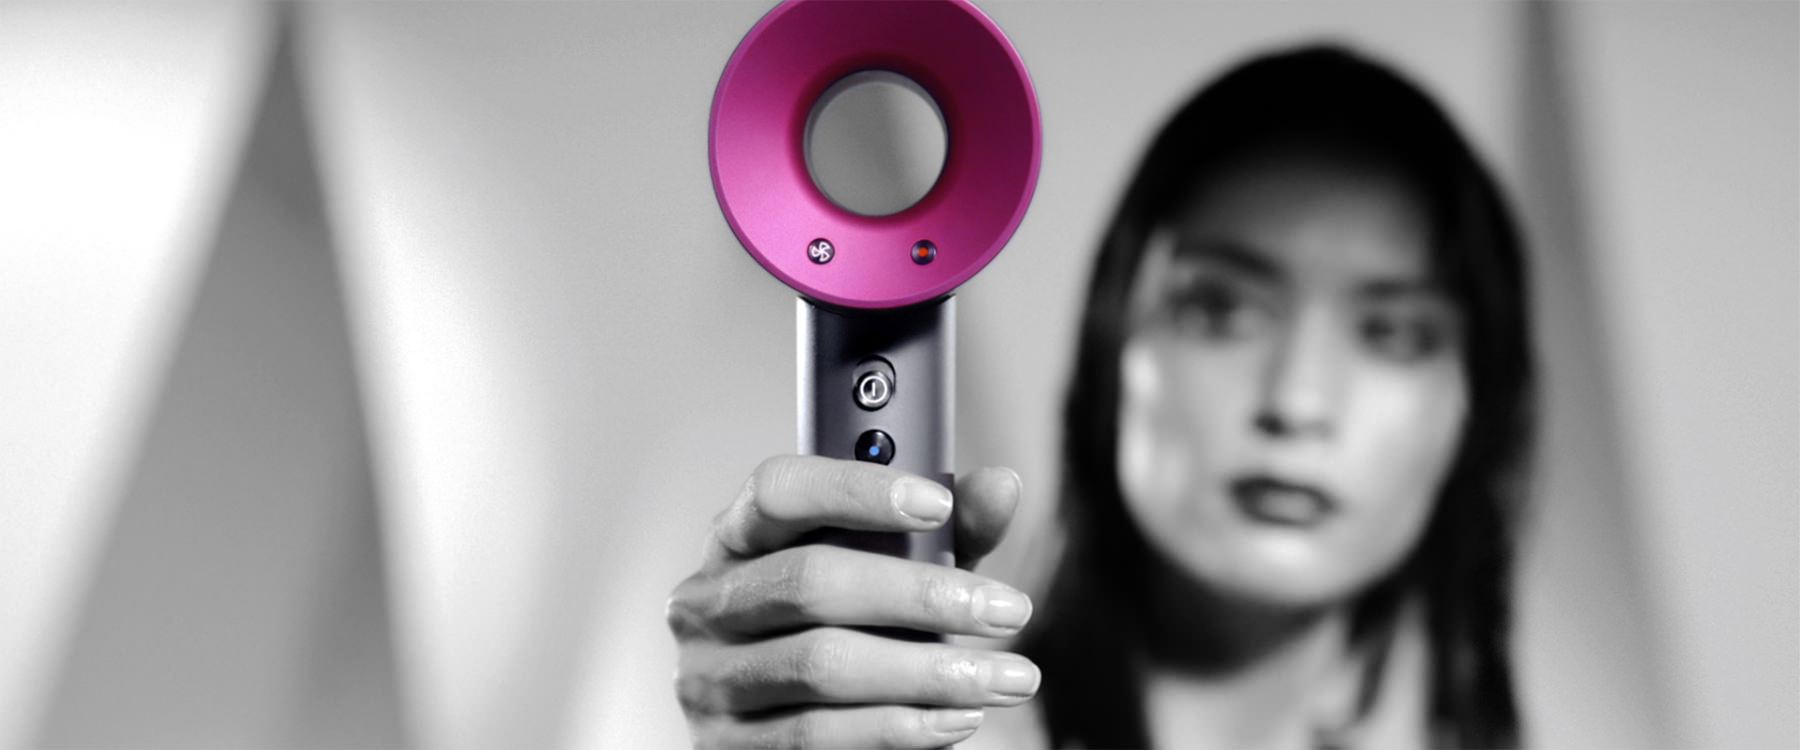 Dyson Supersonic Hairdryer Launch